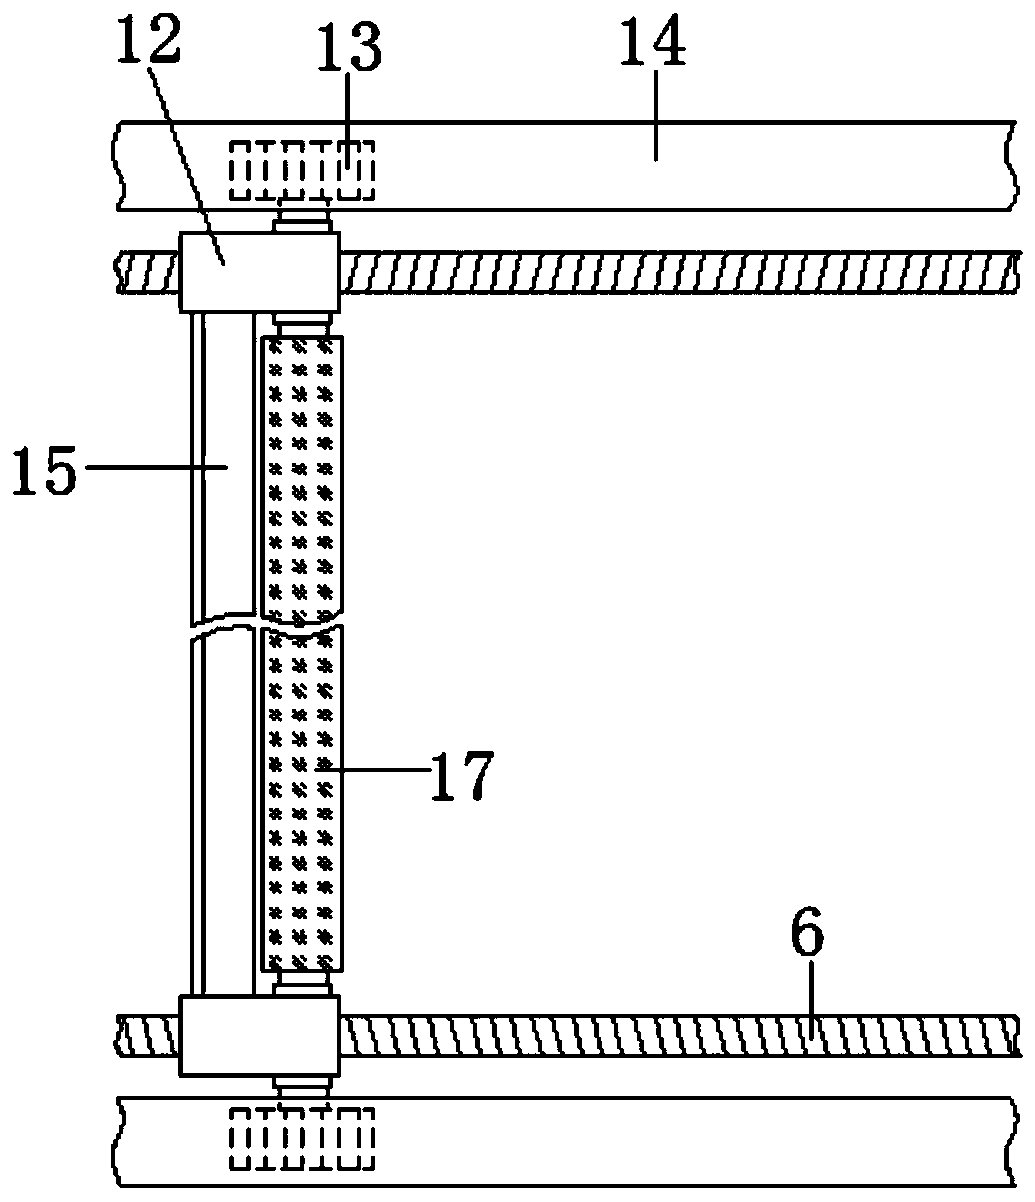 Greenhouse device with automatic deicing and snow removing function